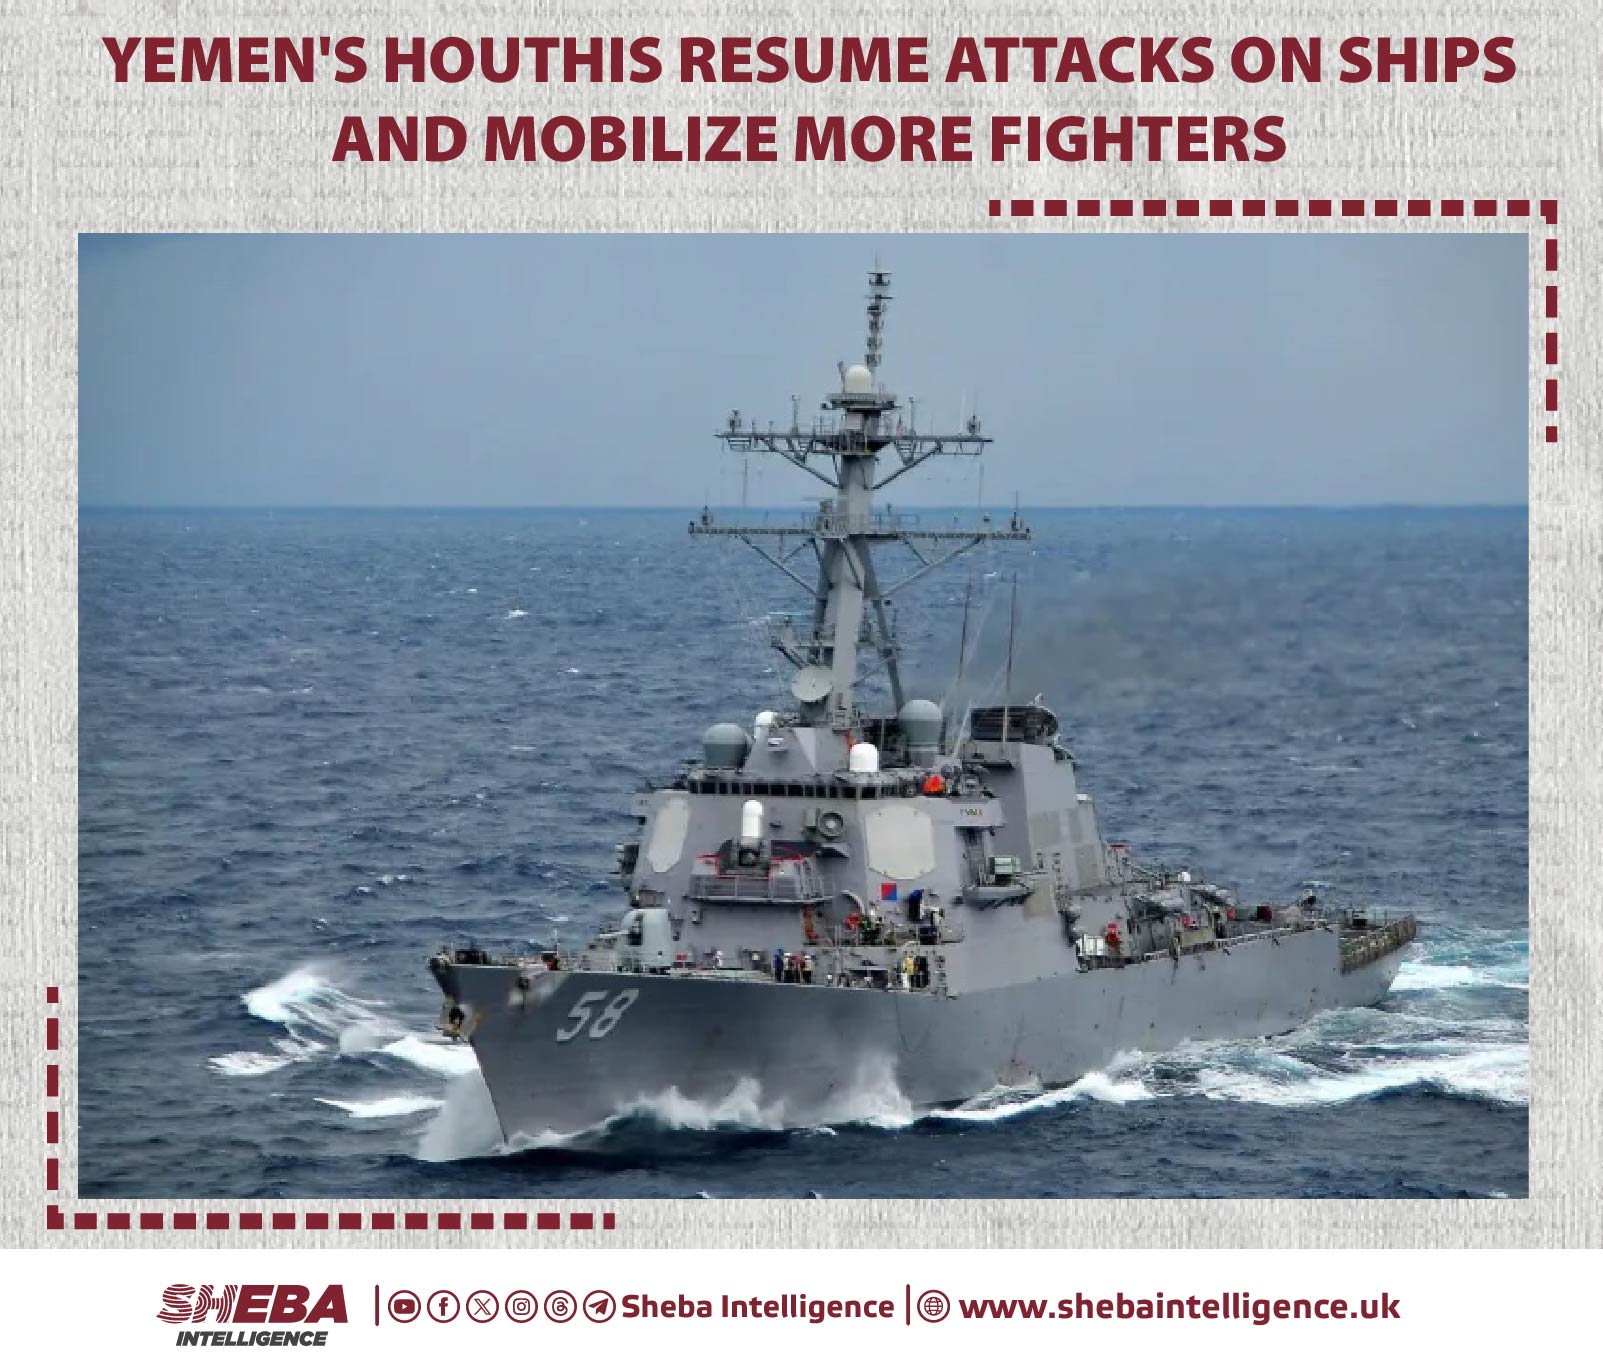 Yemen's Houthis Resume Attacks on Ships and Mobilize More Fighters